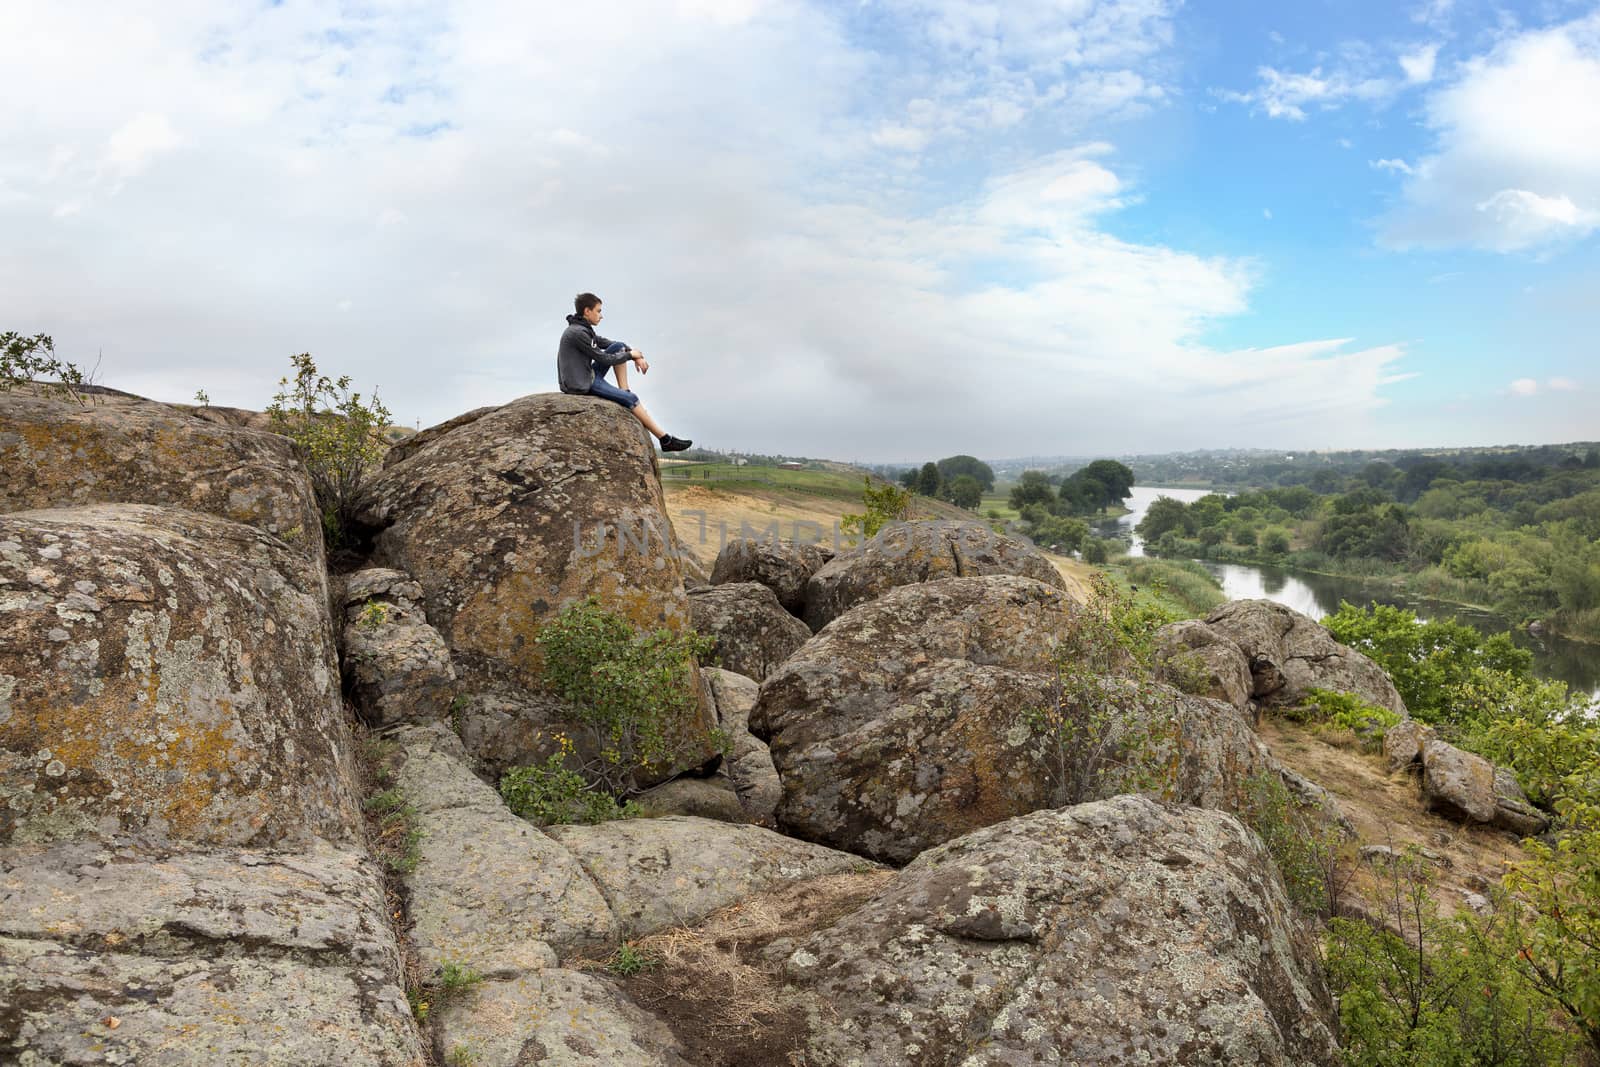 The teenager sits on top of a large stone boulder on the bank of the South Bug River and looks at the river below by Sergii